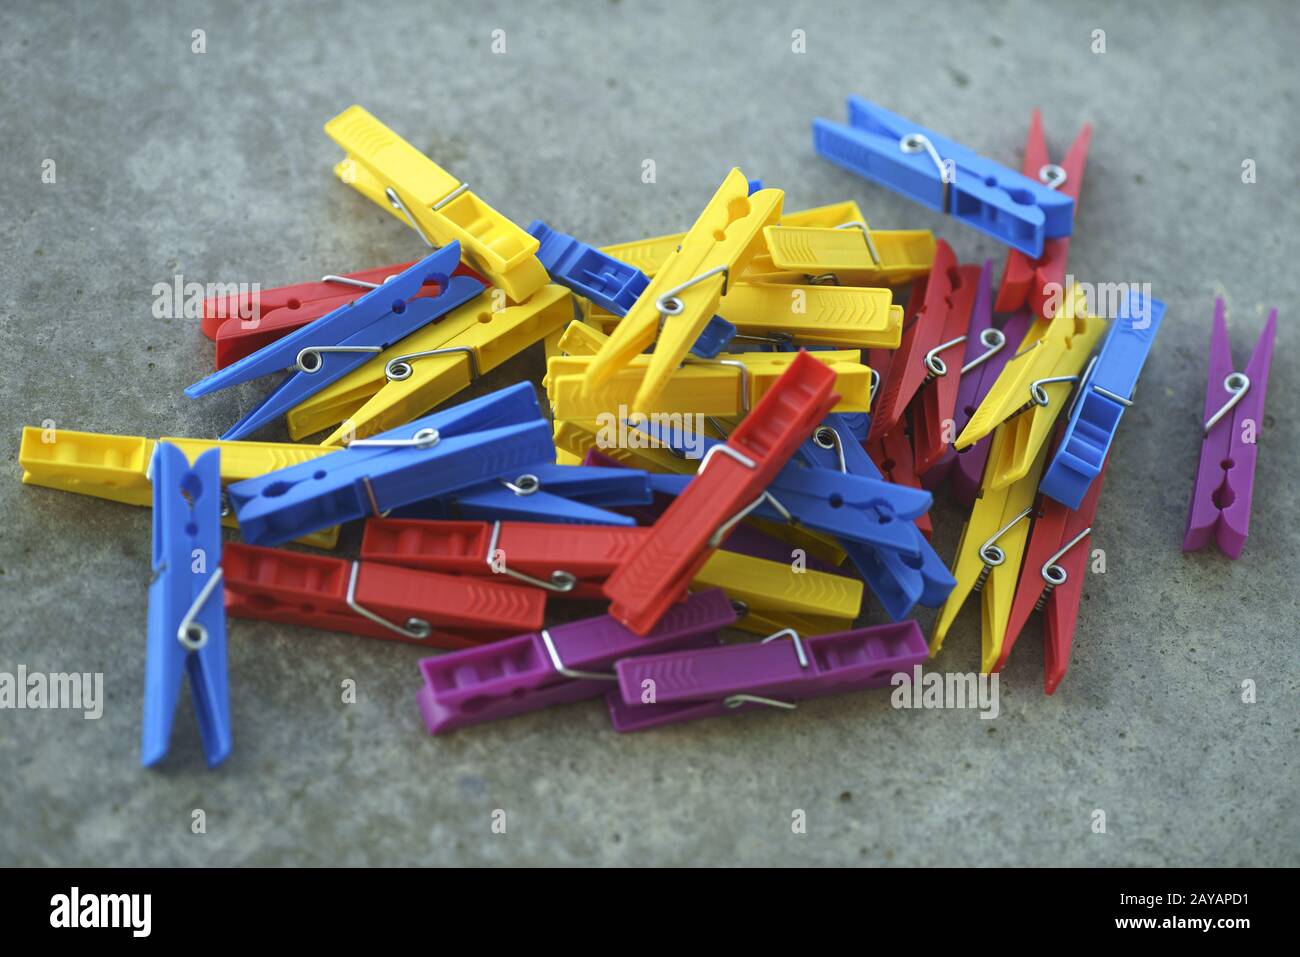 Colorful Plastic Clothespins Scattered Stock Photo